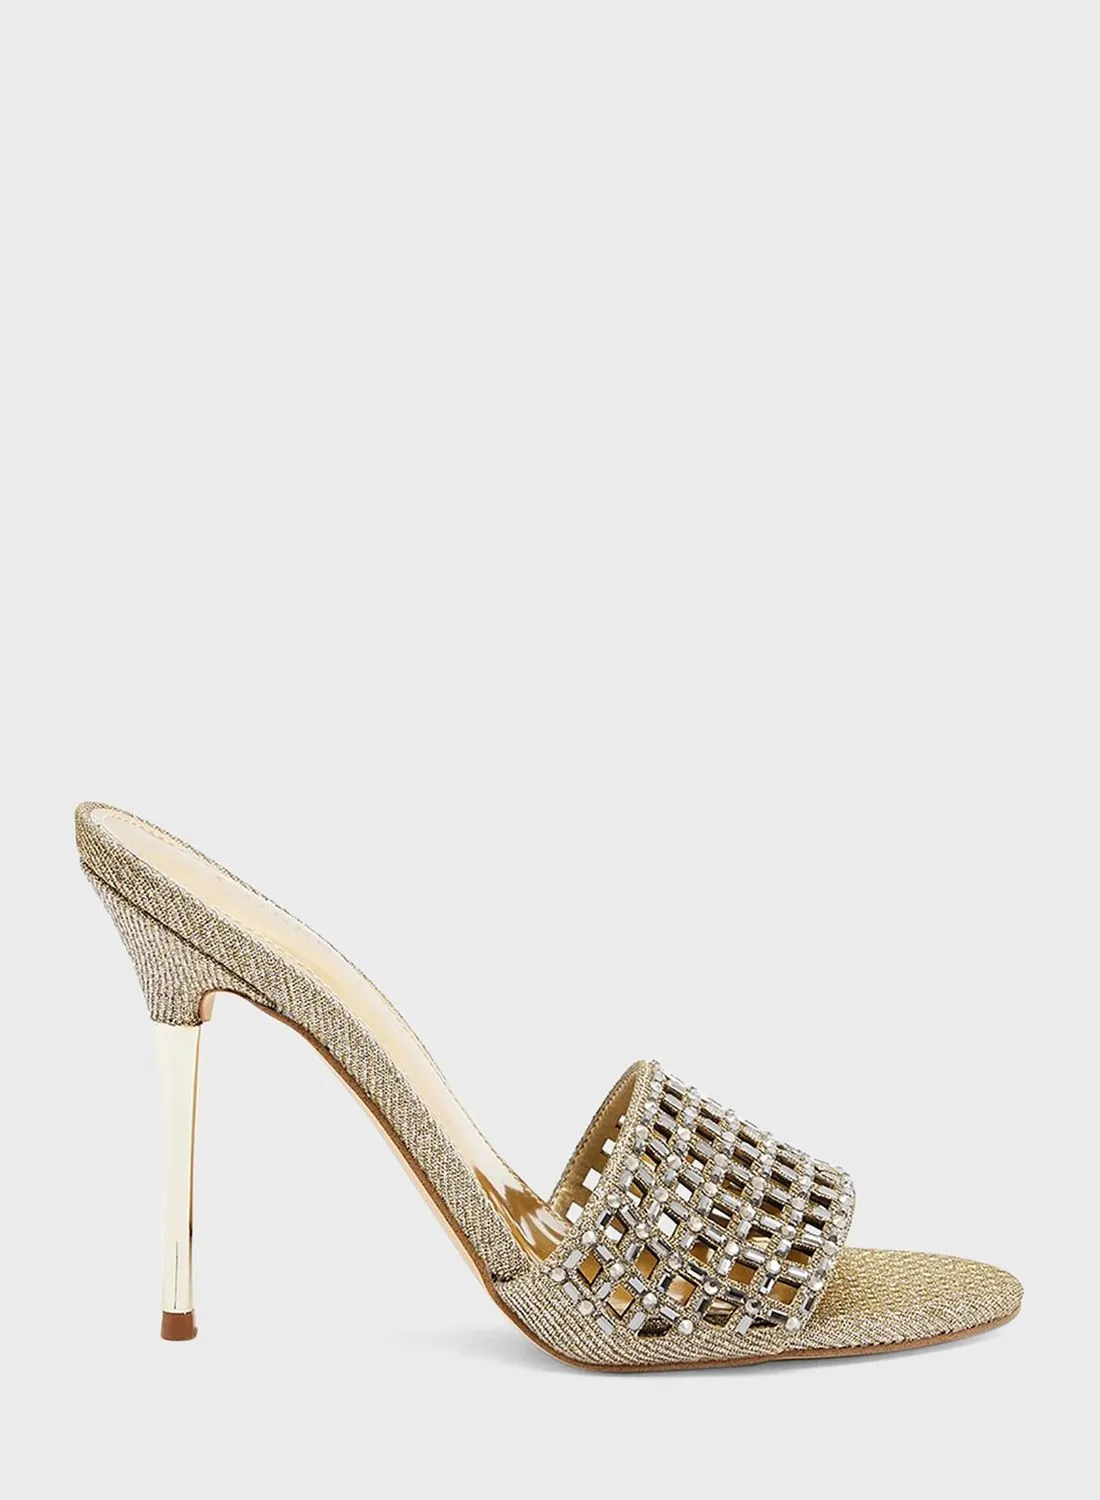 GUESS Mably Studded Heeled Sandals